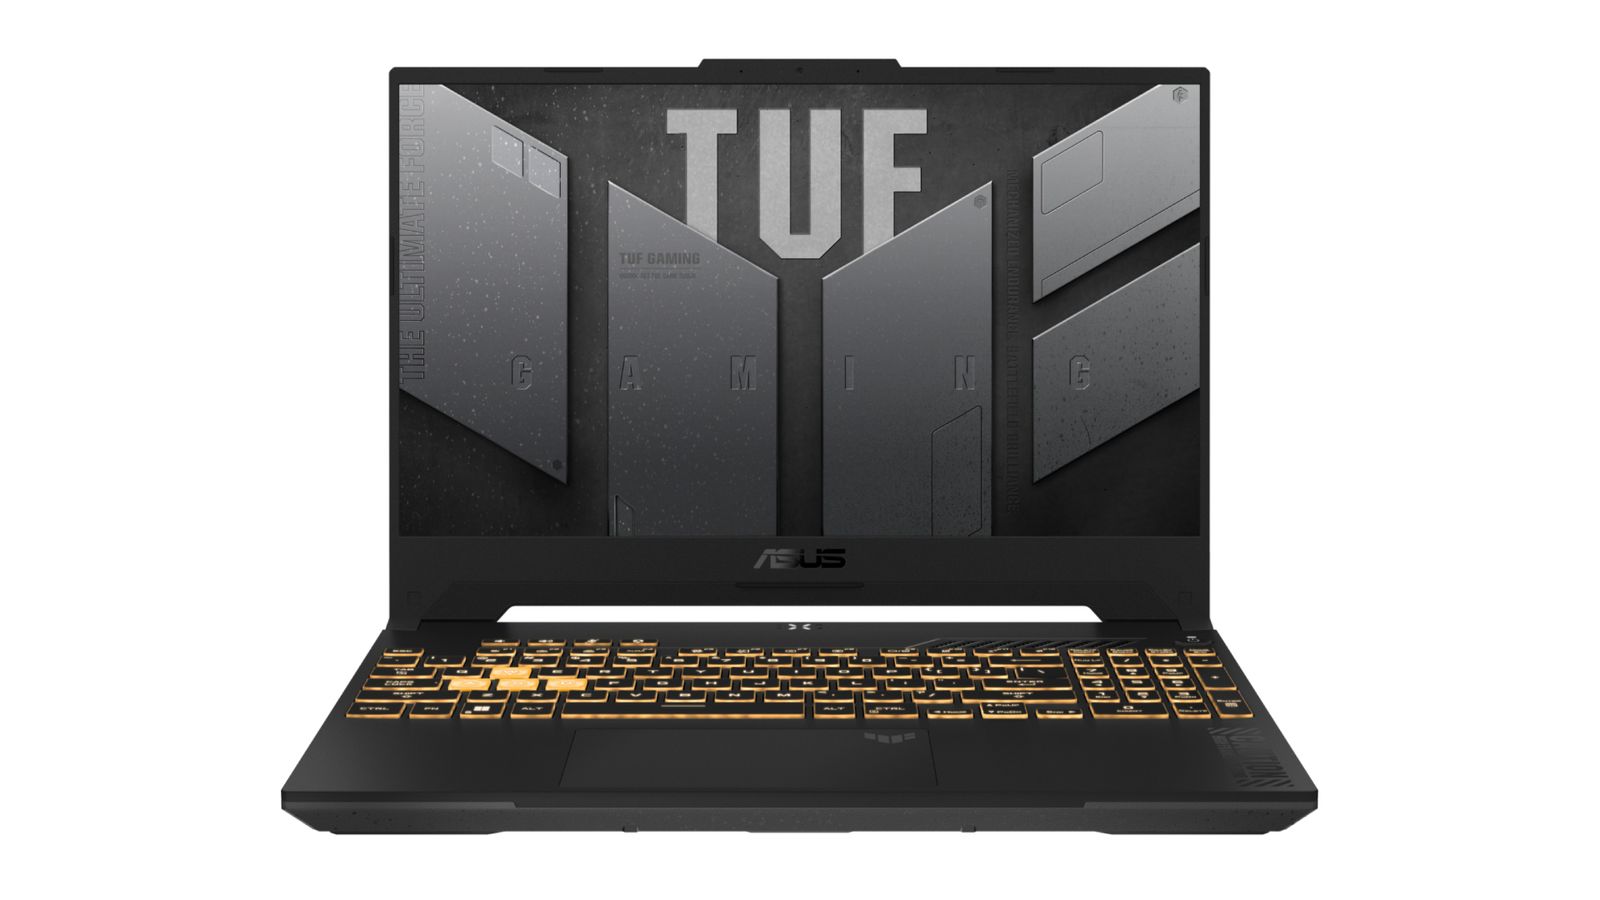 Best Diablo 4 gaming laptop - ASUS TUF Gaming F15 product image of a black gaming laptop featuring yellow backlit keys and grey TUF branding on the display.